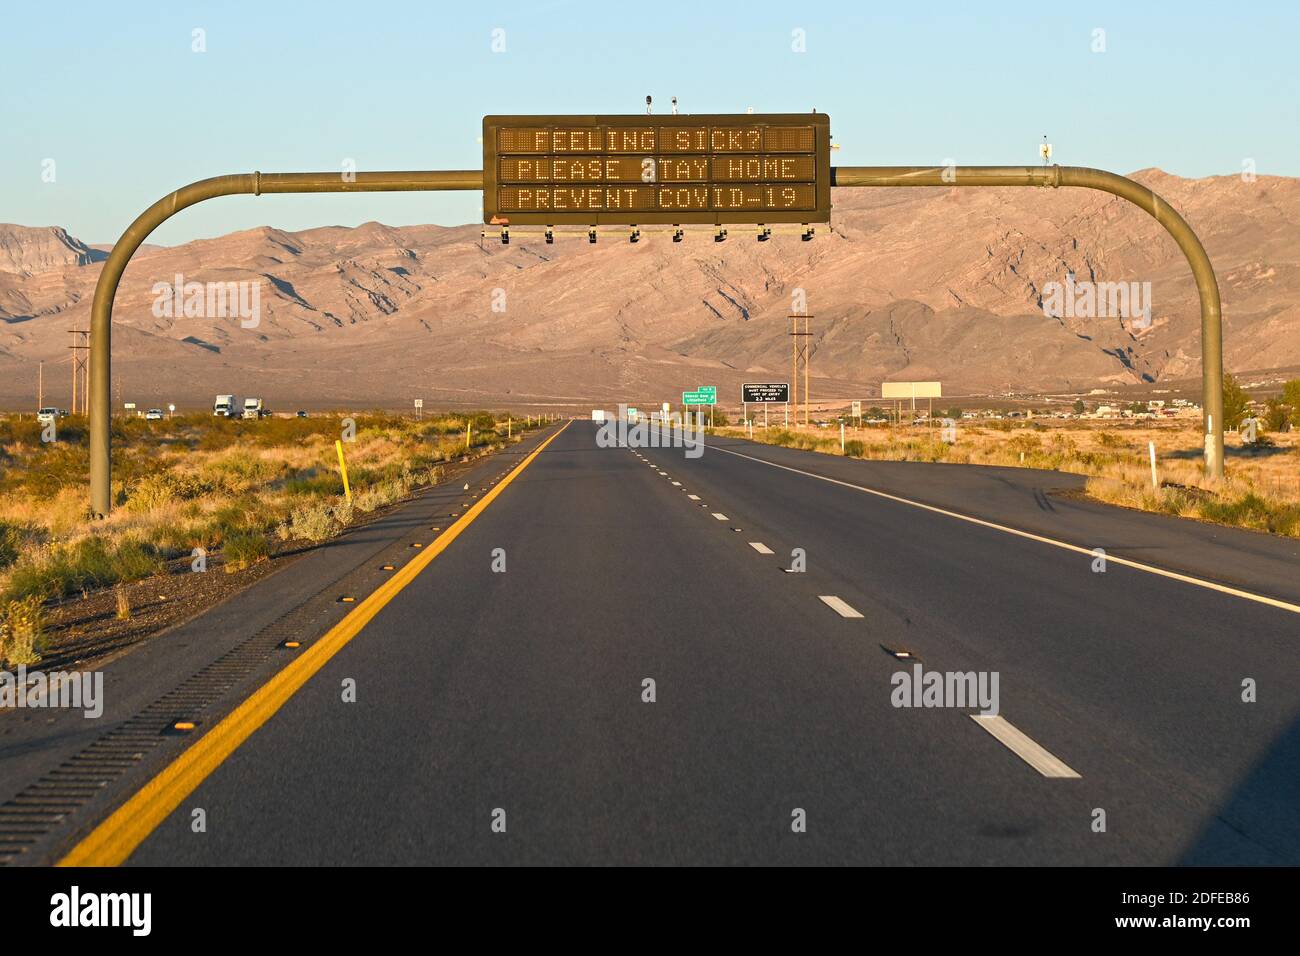 Signage over Interstate 15 North urges “Feeling Sick? Please Stay Home Prevent Covid-19”, Tuesday, Nov. 10, 2020, Littlefield, Ariz. (Dylan Stewart/Im Stock Photo